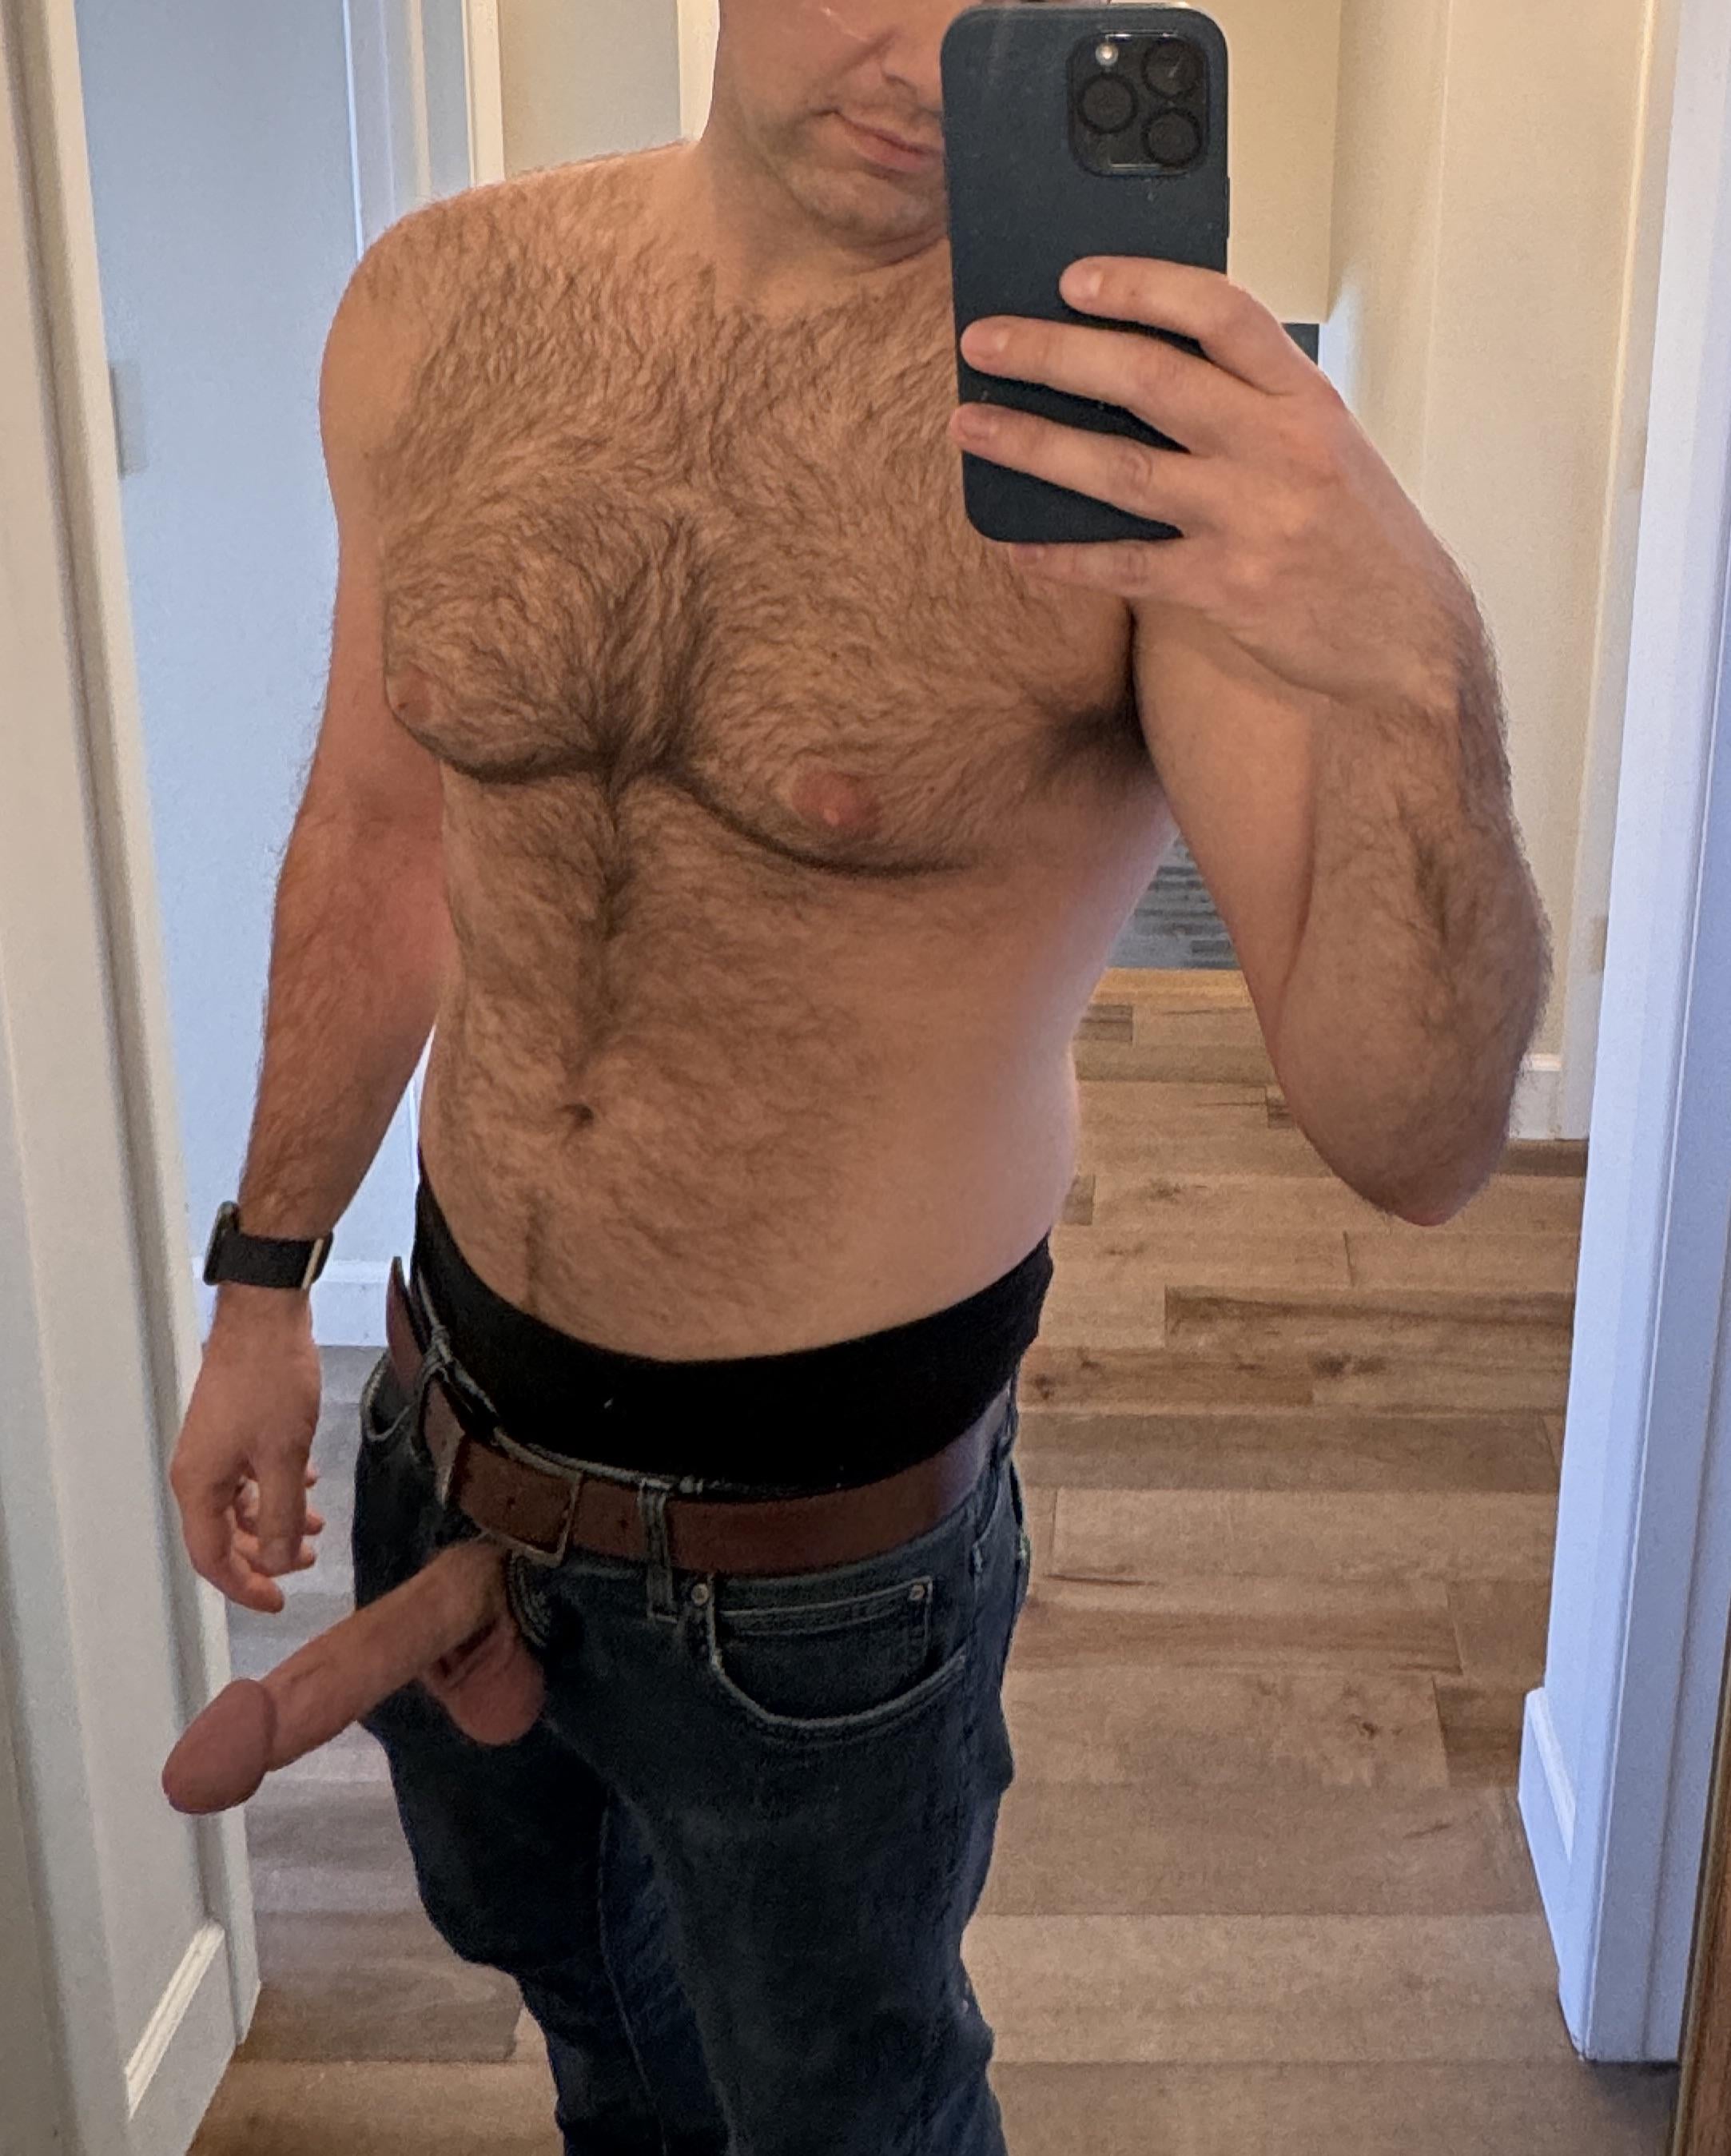 Do these jeans make my cock look big